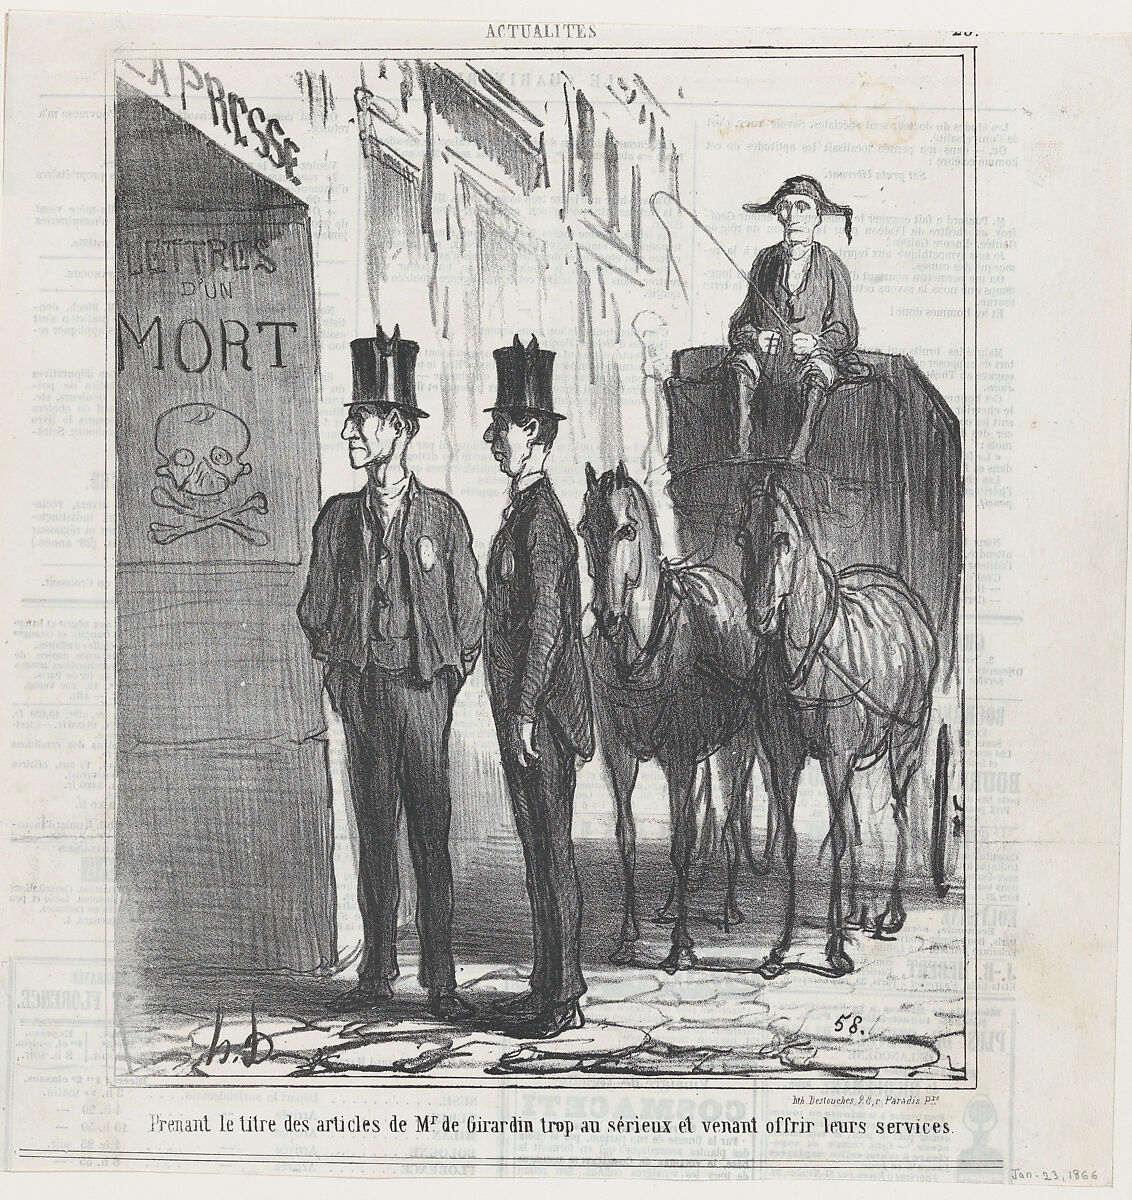 Taking the headlines of Monsieur de Girardin too seriously and coming to offer their services, from 'News of the day,' published in Le Charivari, January 23, 1866, Honoré Daumier (French, Marseilles 1808–1879 Valmondois), Lithograph on newsprint; second state of two (Delteil) 